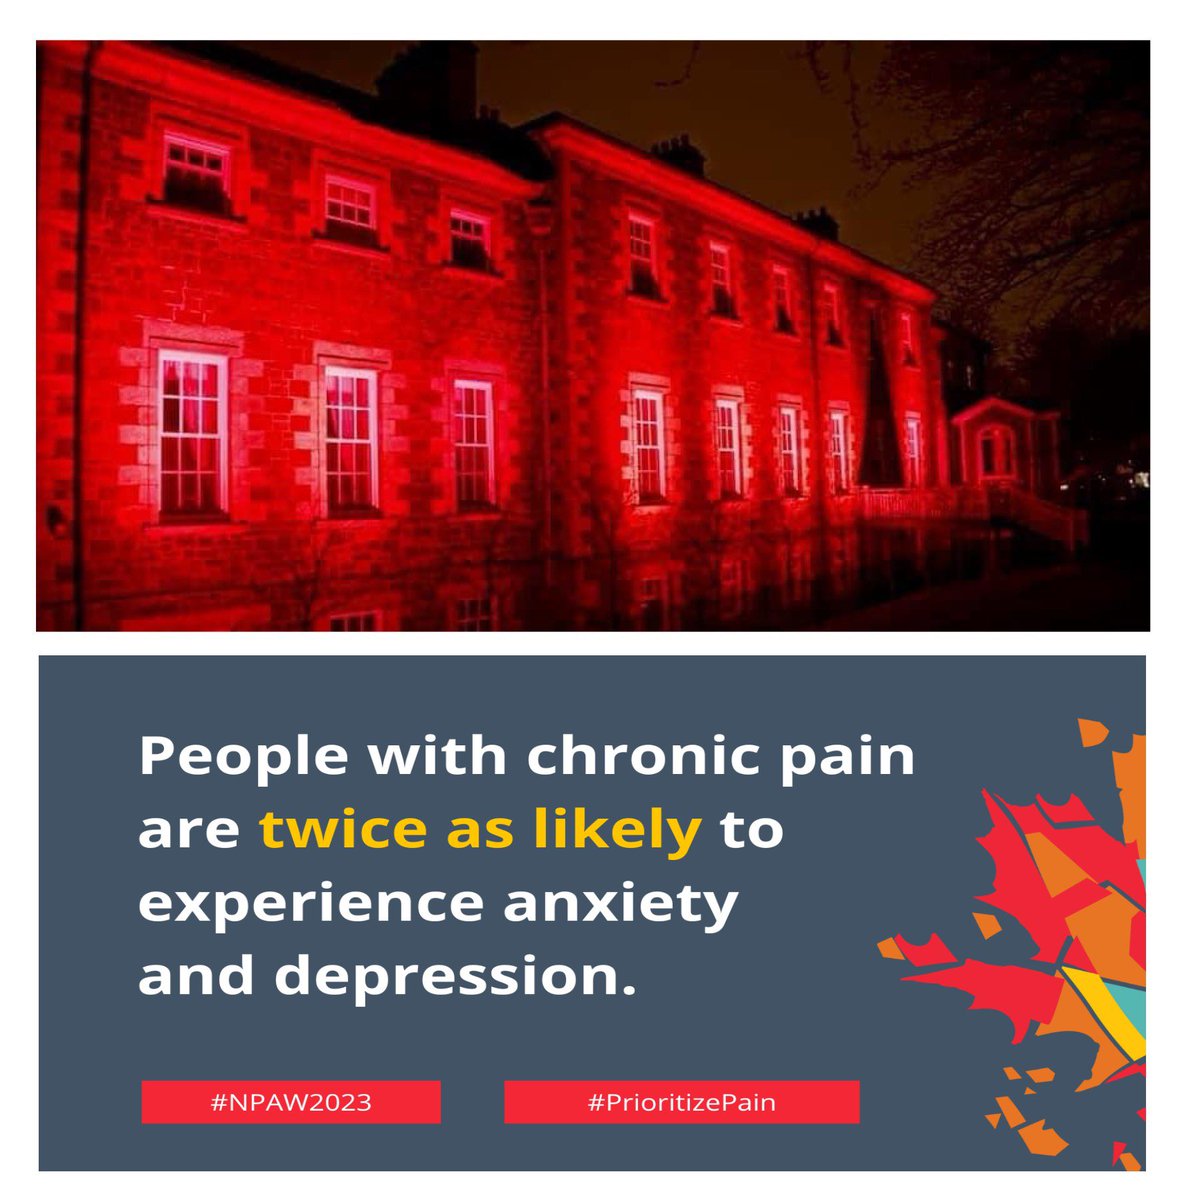 Nov 5 GH is glowing red in recognition of #NPAW2023, Nov 5-11, supported by @pain_canada to highlight chronic pain & impact on 1 in 5 Cdns who live w/it. @GovCanHealth Action Plan for Pain aims to improve approach to prevention & mgmt. #PrioritizePain See  PainCanada.ca/actionplan